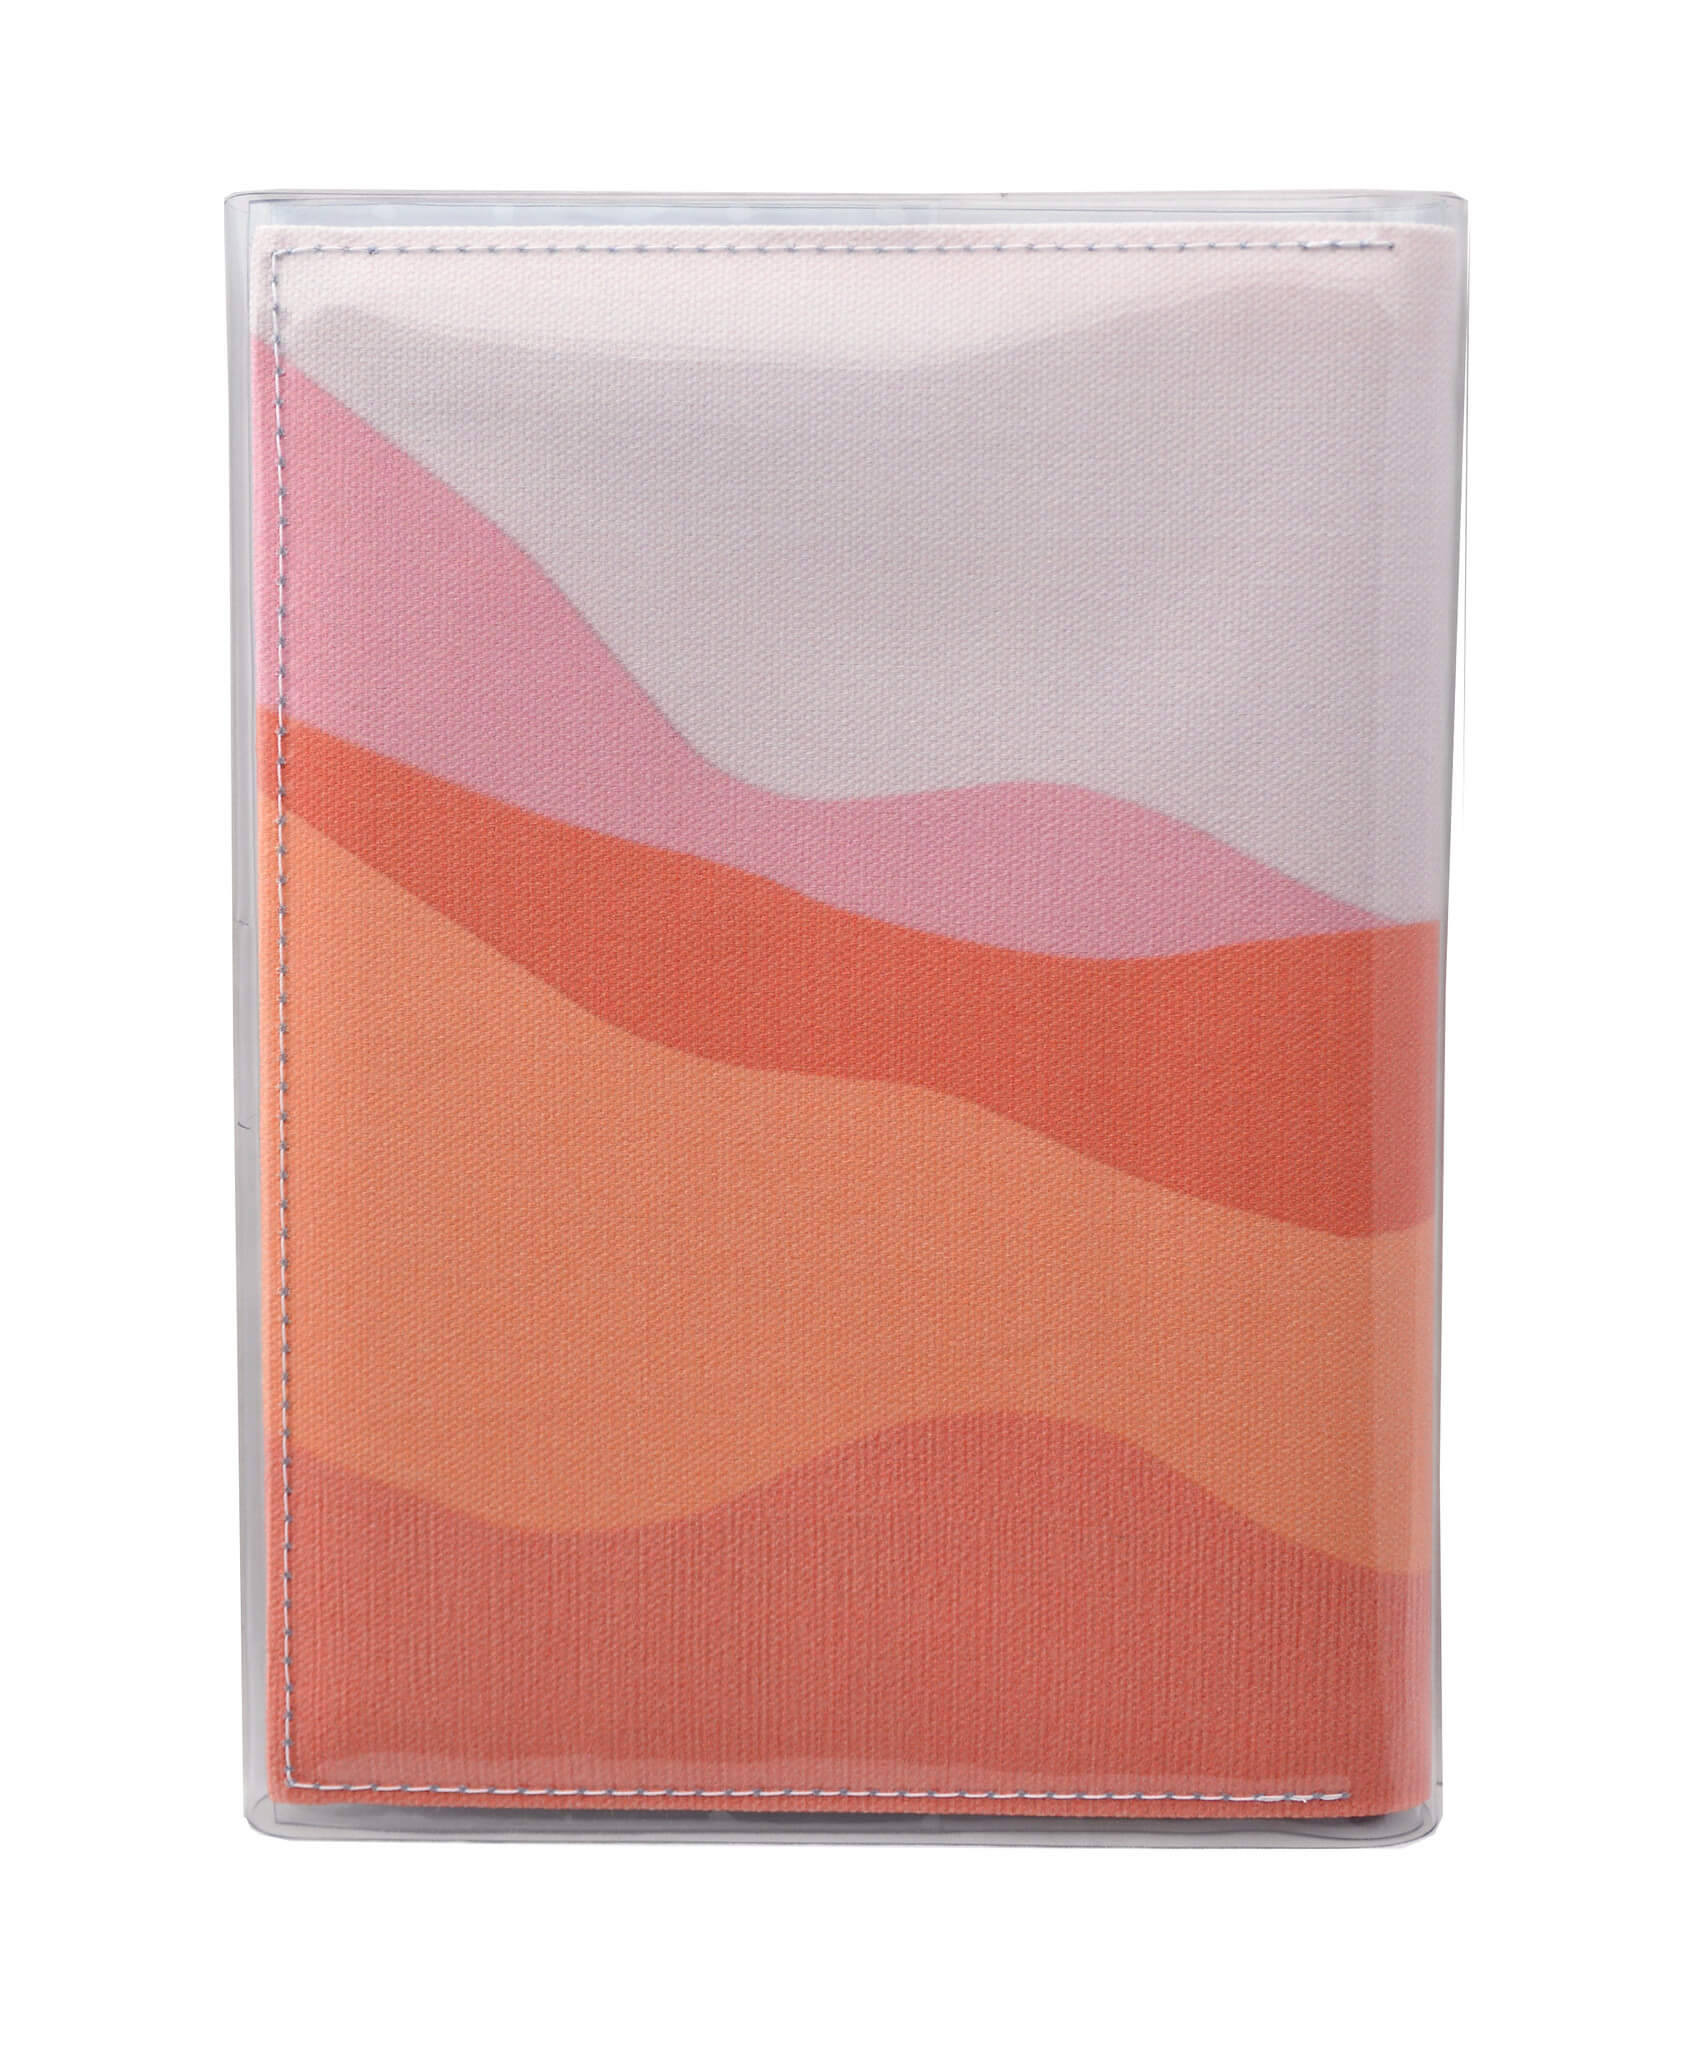 This is an image of the rear of a Kitty Came Home A5 journal in the 'Waiting for the sun' design by Satin and Tat. A landscape of pink hued sands rising to higher hills.